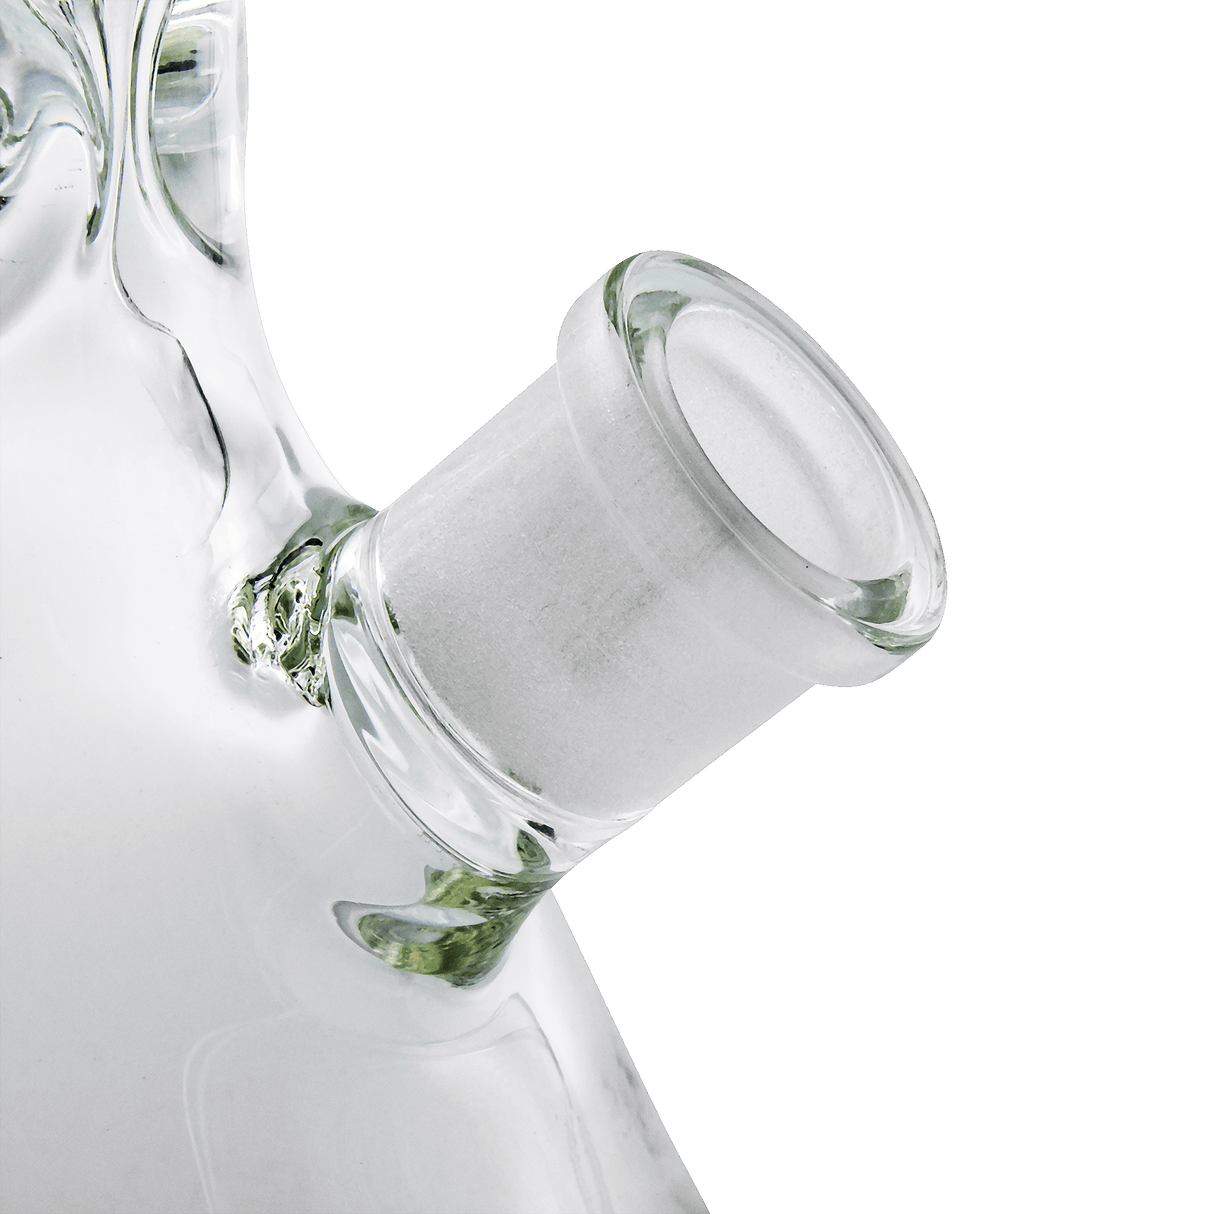 Close-up of LA Pipes Thicc Boy Beaker Bong joint with heavy 9mm borosilicate glass